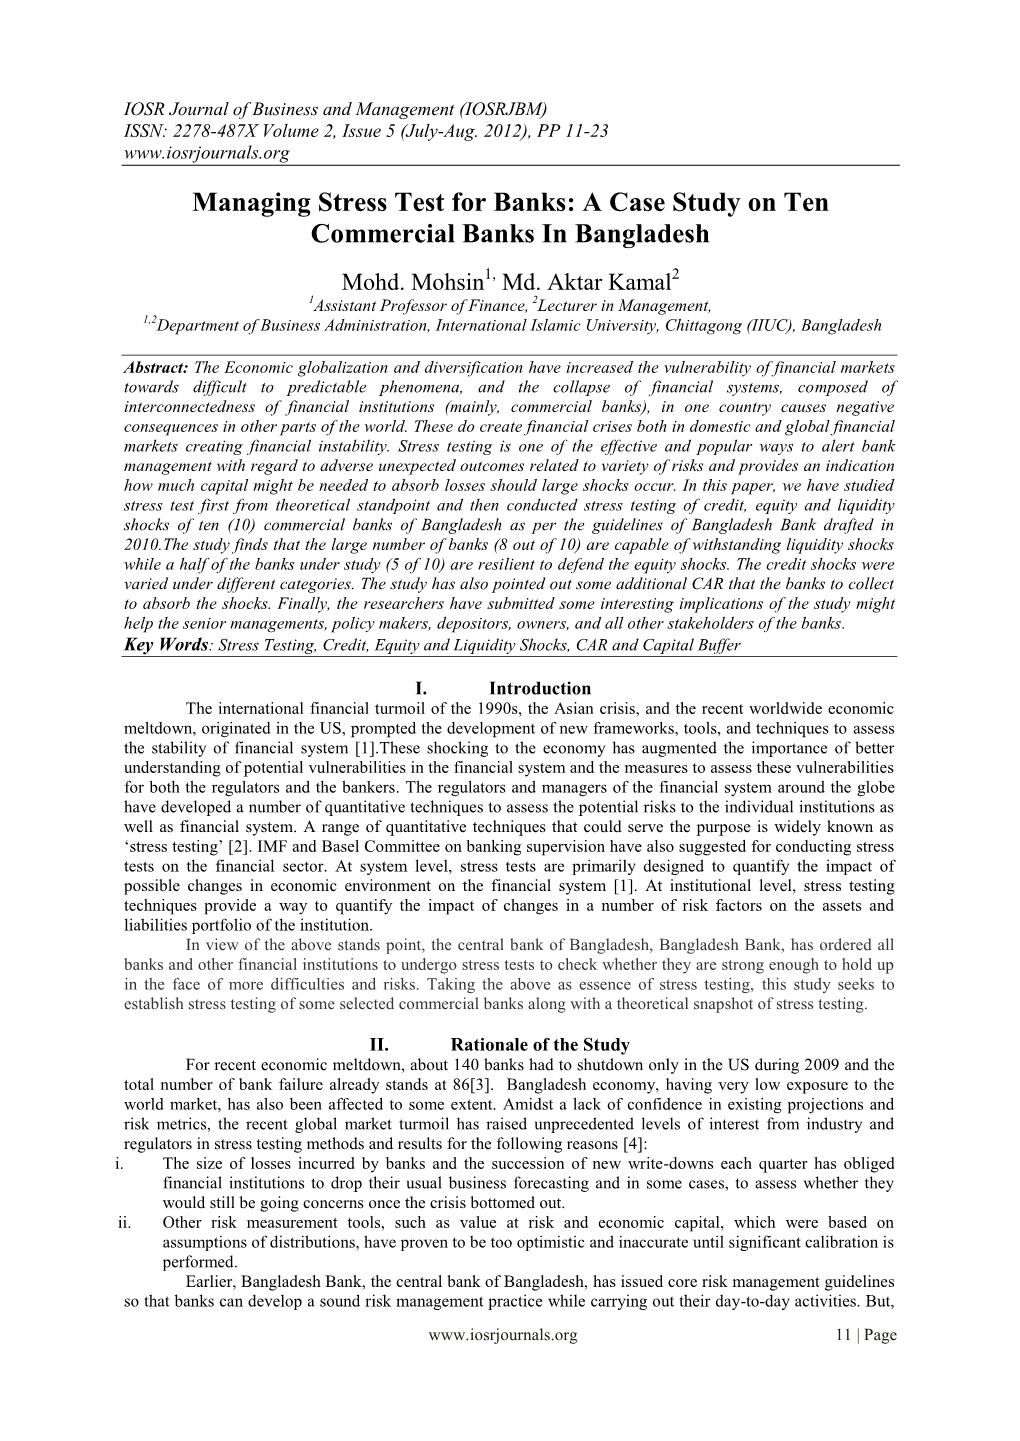 Managing Stress Test for Banks: a Case Study on Ten Commercial Banks in Bangladesh